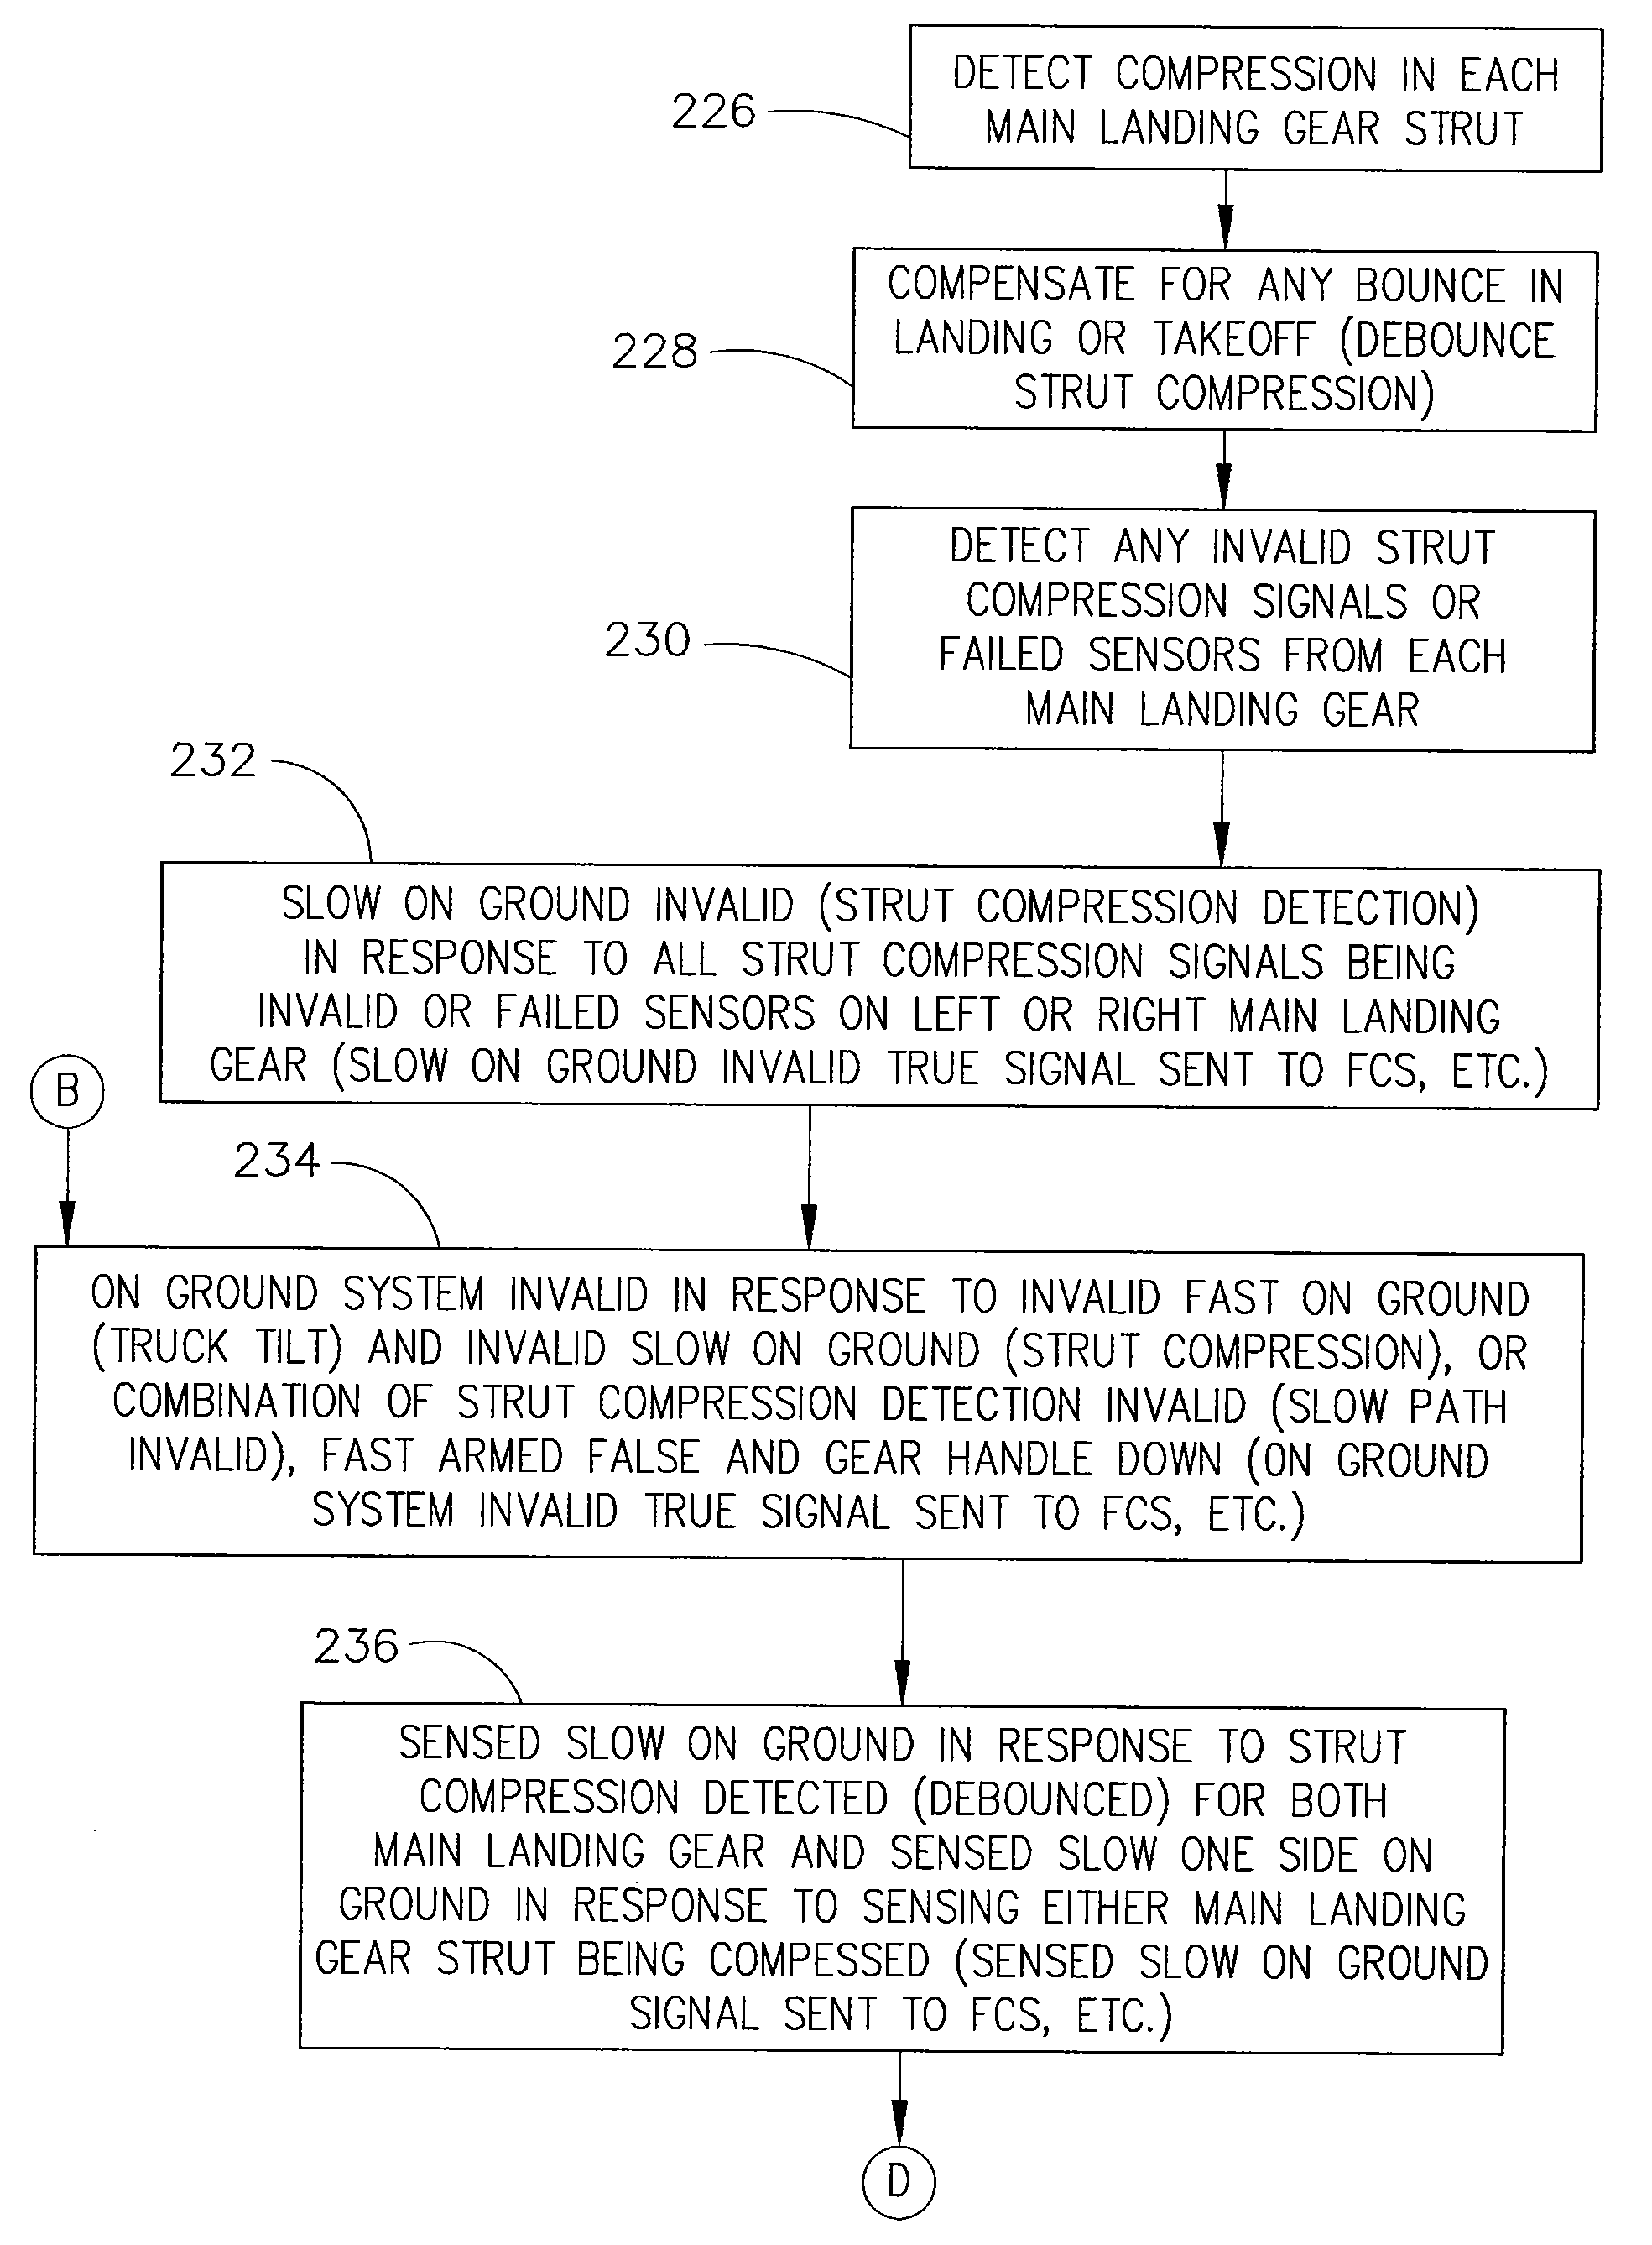 Air-ground detection system and method